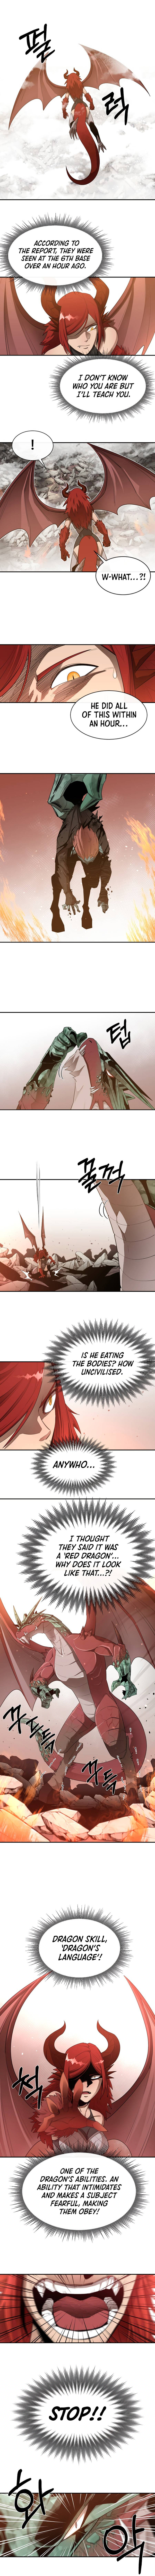 I Grow Stronger By Eating! - Page 3